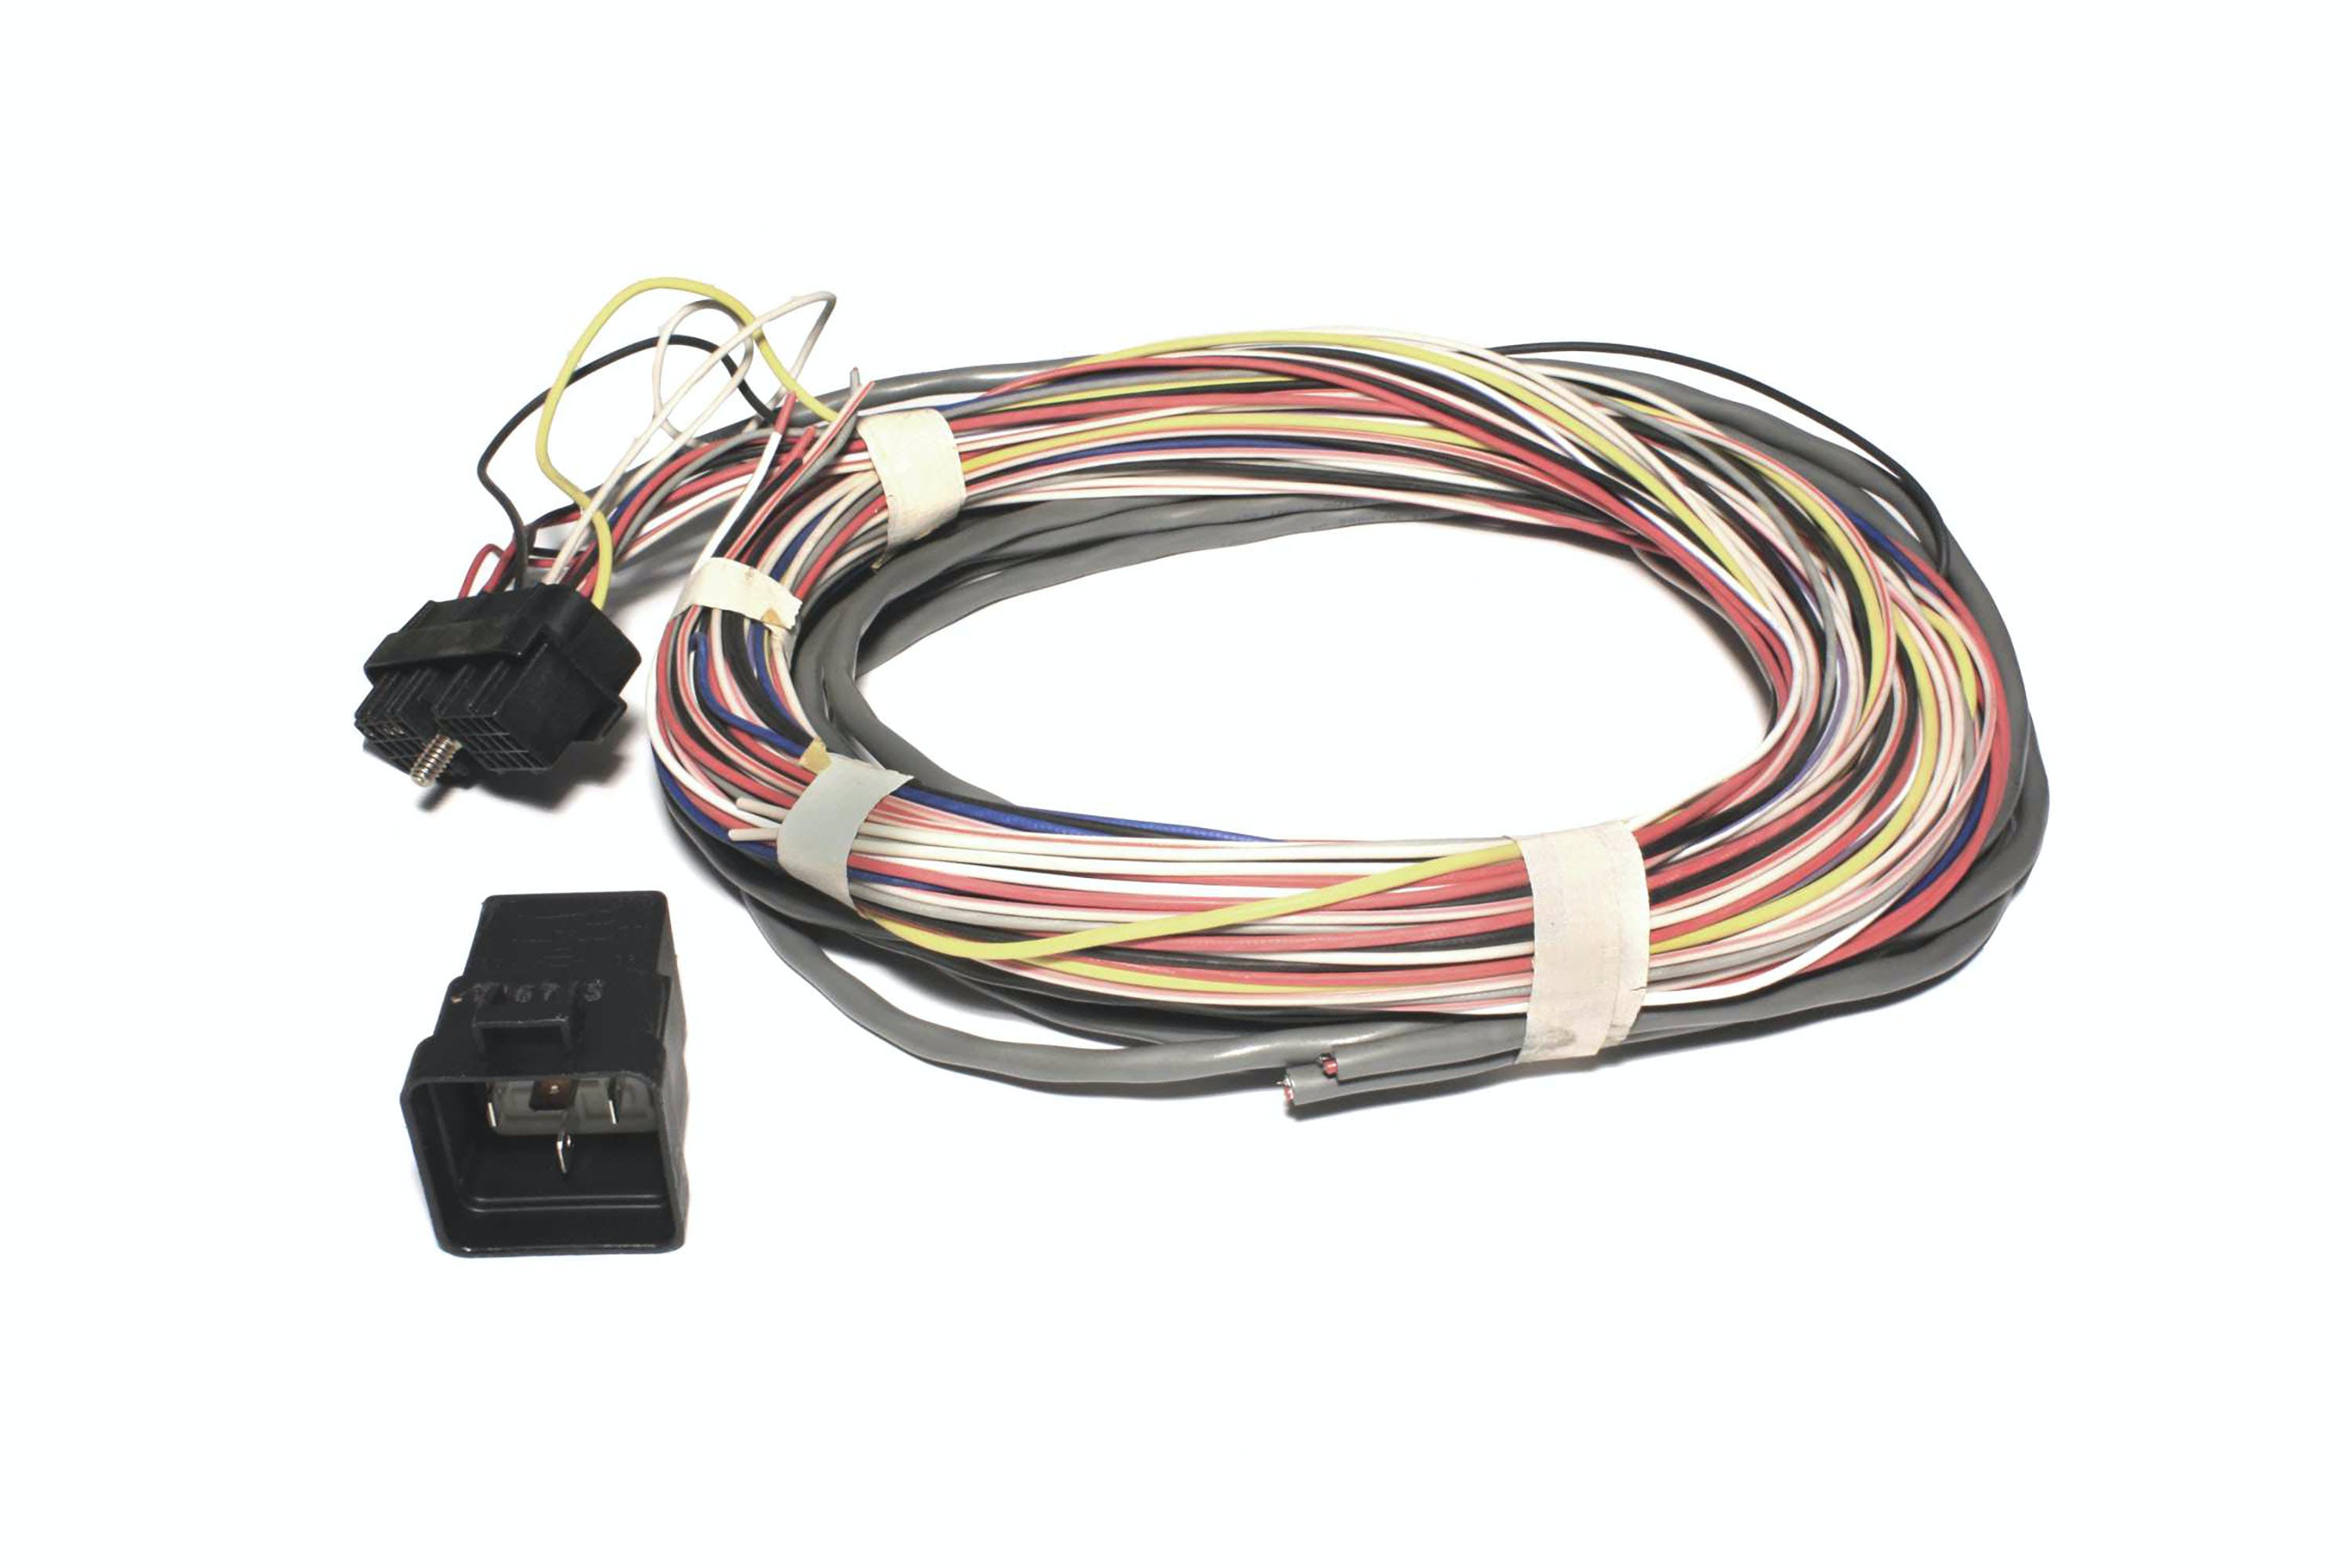 FAST - Fuel Air Spark Technology 307042 Wiring Harness, Fast 4-Cyl Fue L Injector